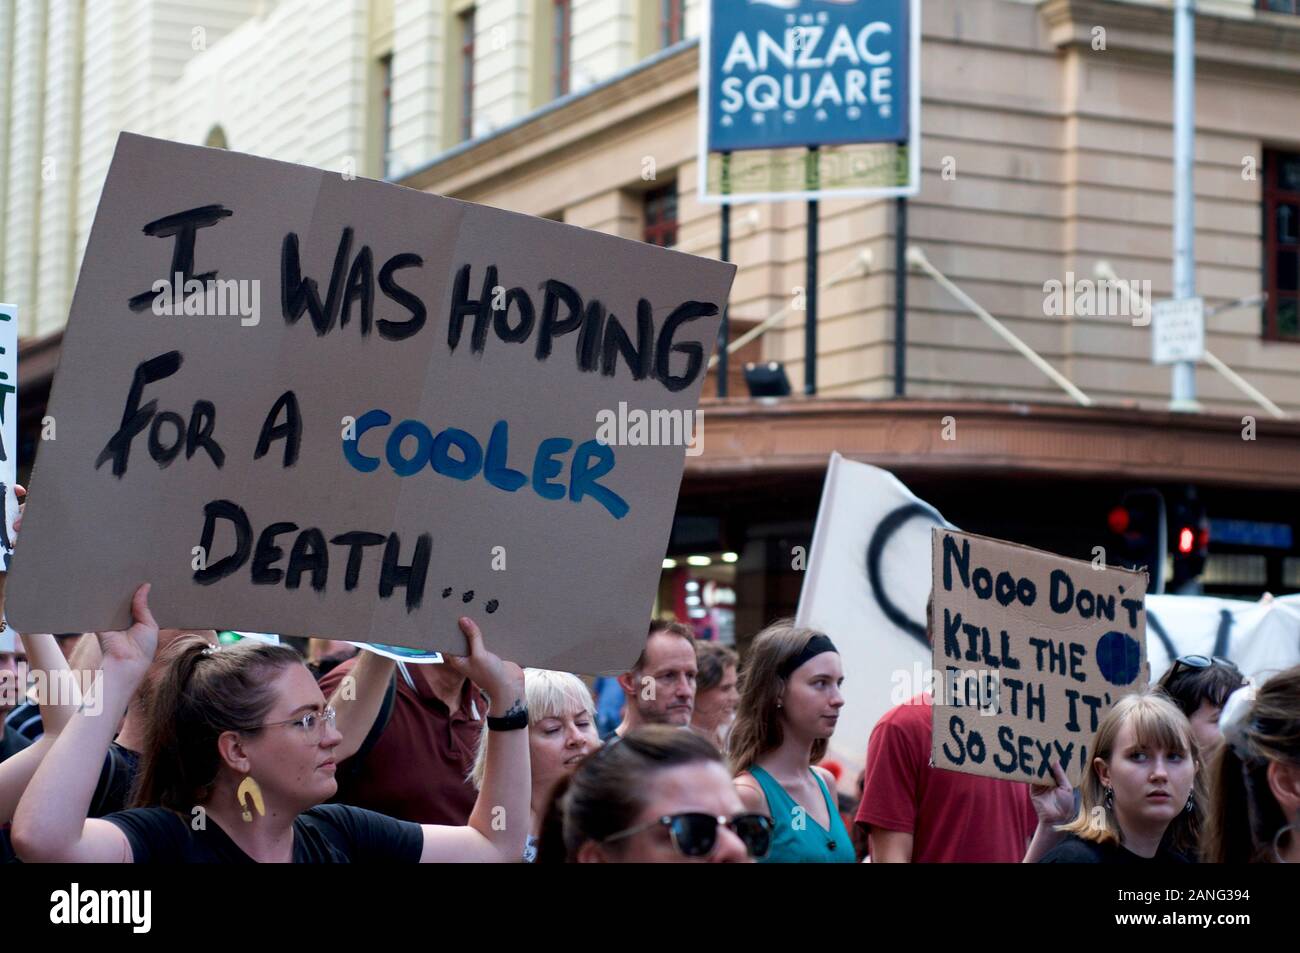 Brisbane, Queensland, Australia - 10th January 2020 : A woman holds a sign protesting government inaction during a rally for climate change action in Stock Photo